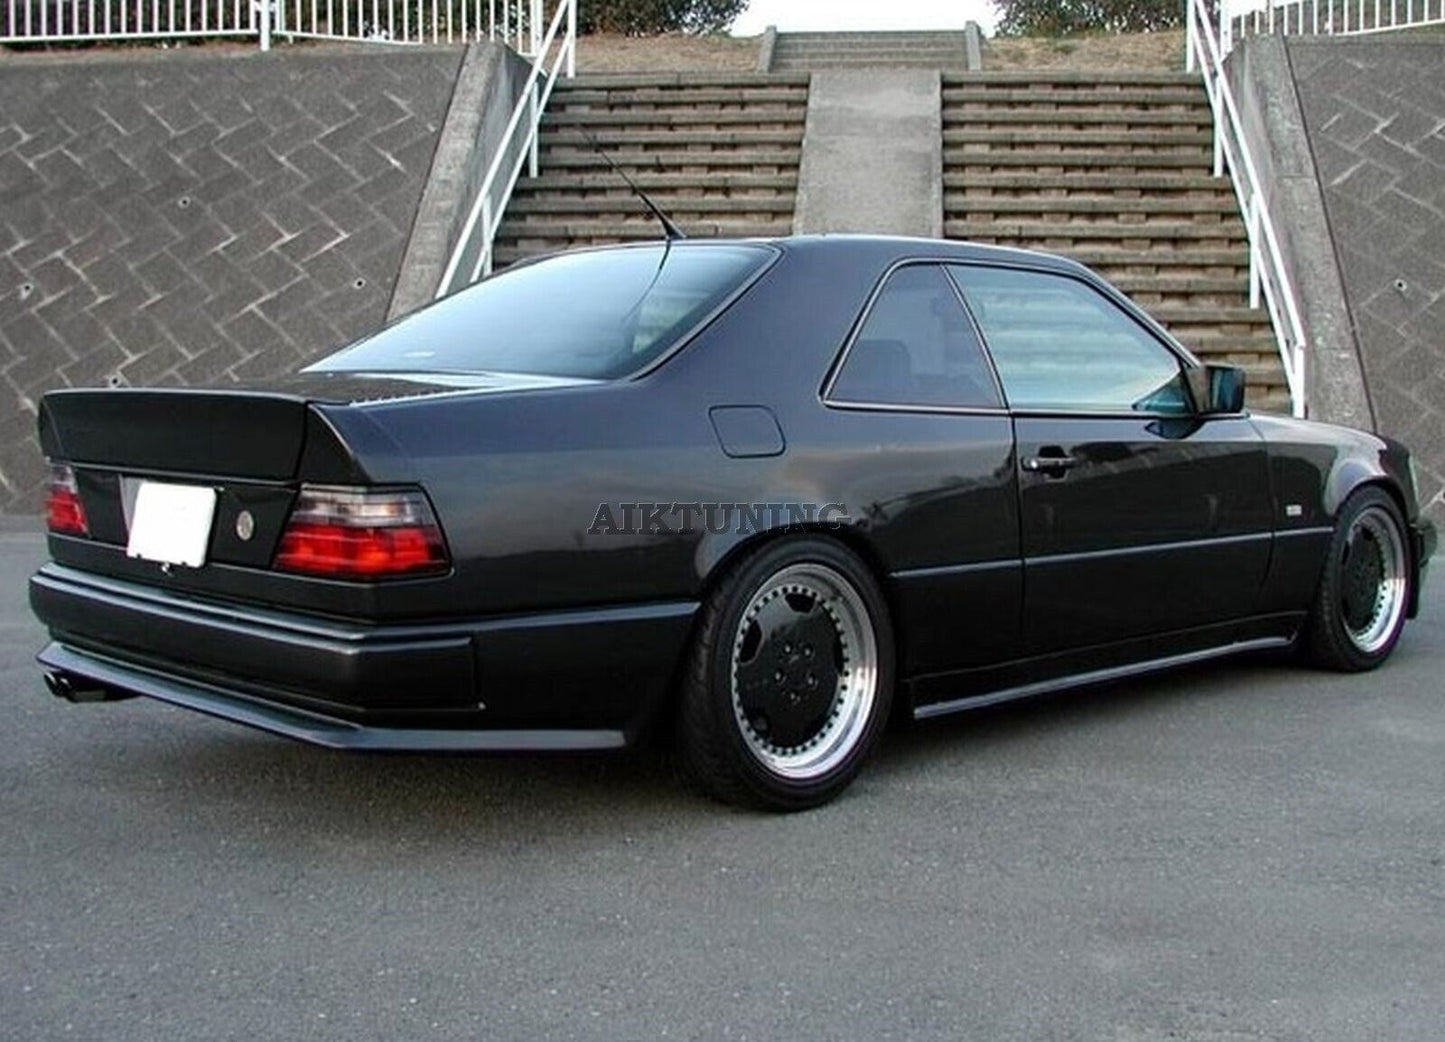 Full Body Kit Gen 2 Coupe (Fits All Mercedes Benz W124 C126 Coupe AMG)